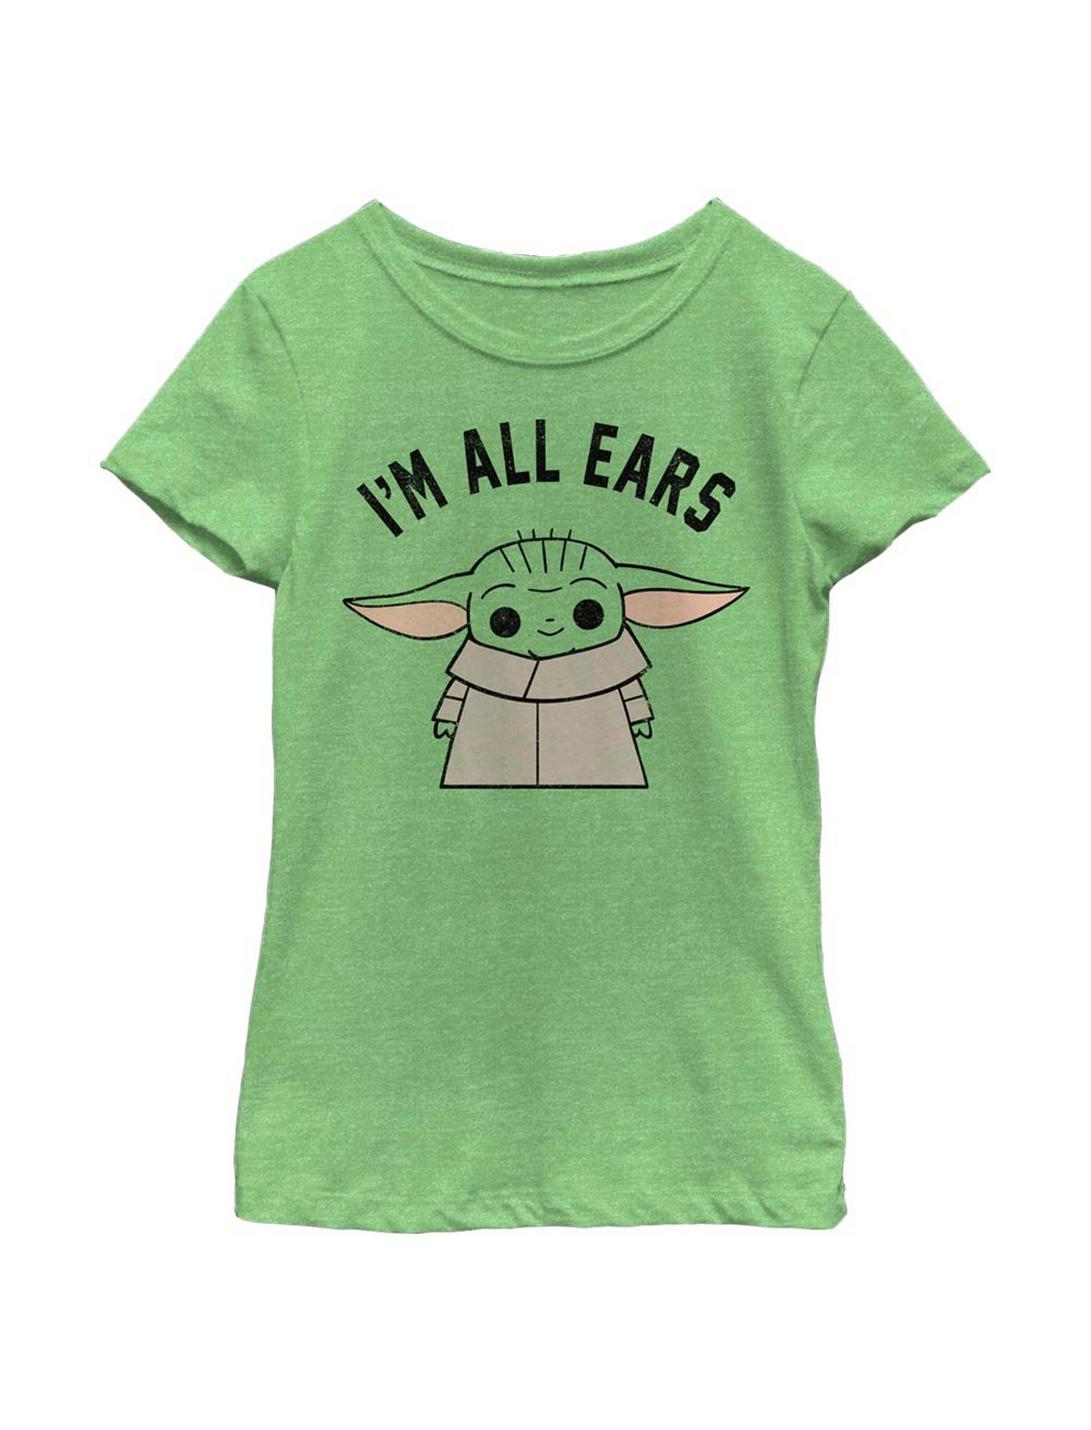 Plus Size Star Wars The Mandalorian The Child All Ears Youth Girls T-Shirt, GREEN APPLE, hi-res